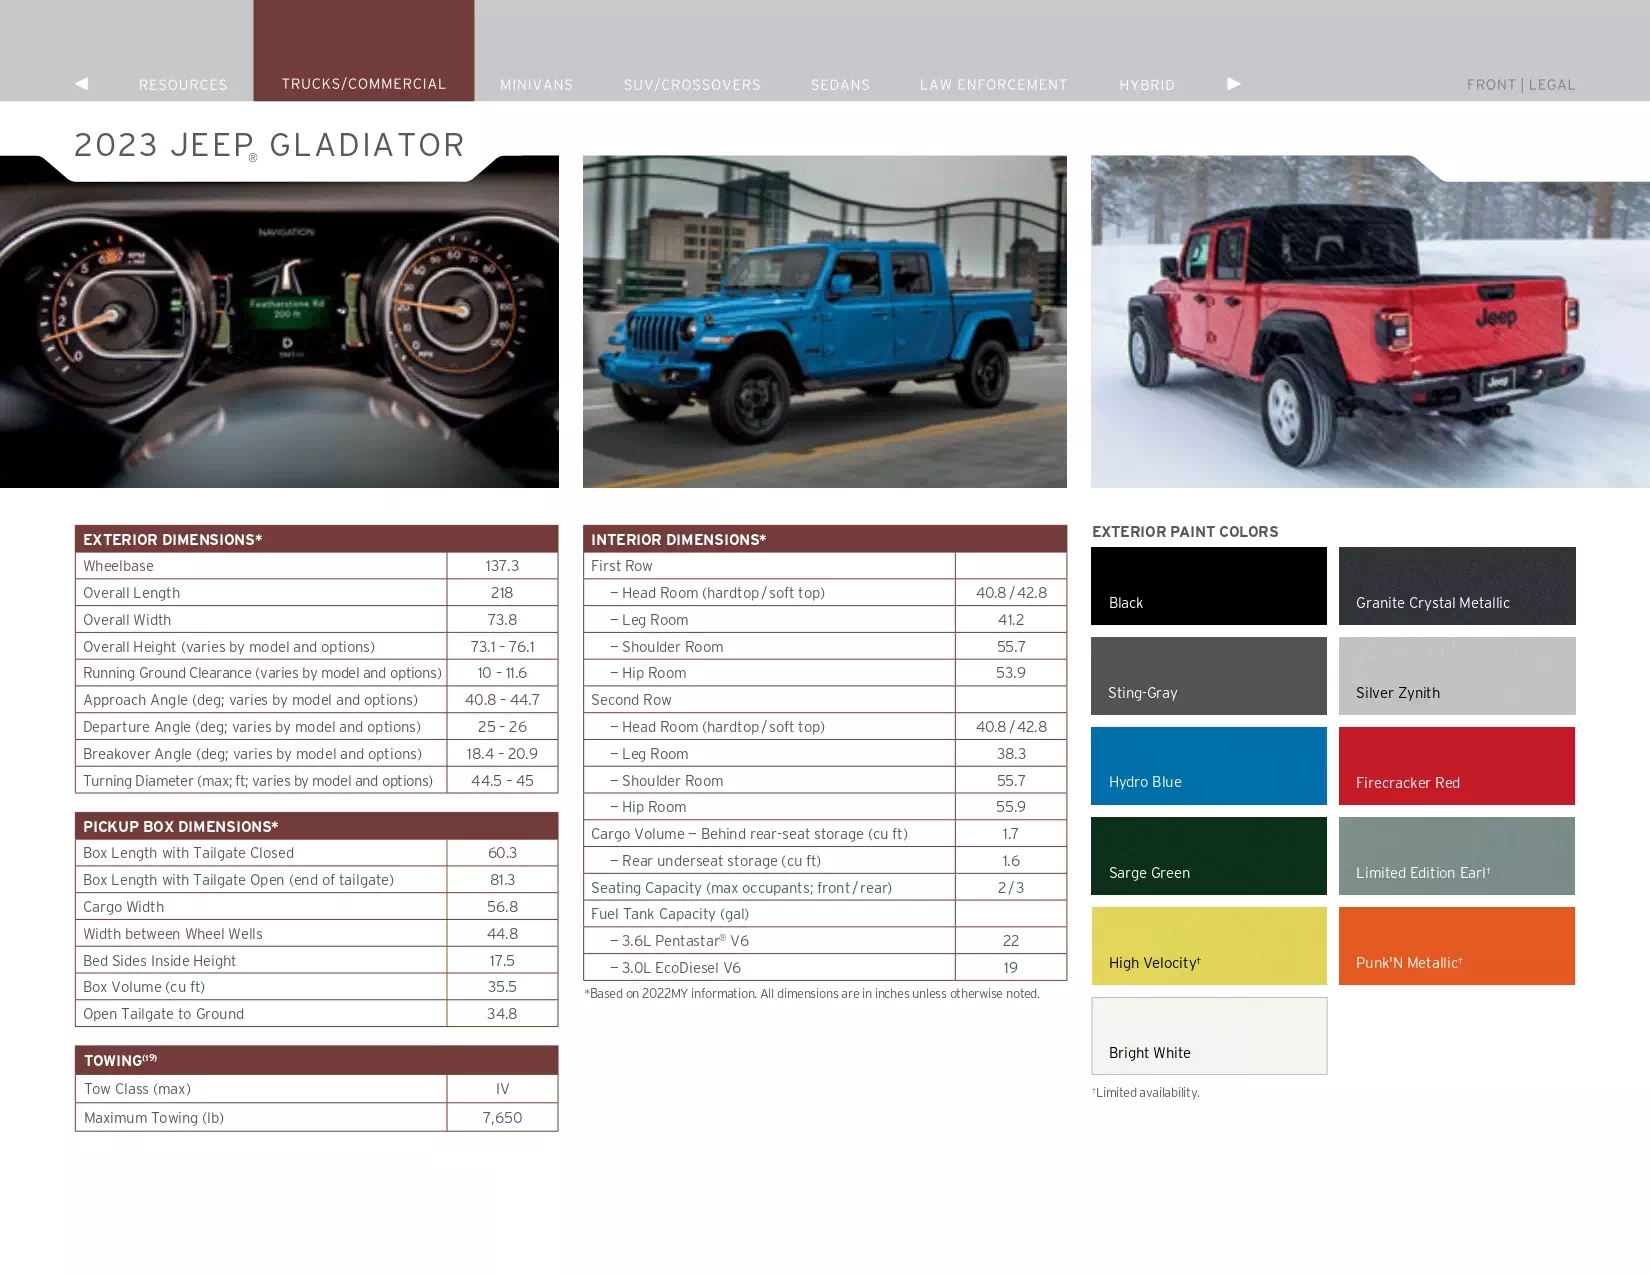 models, features and colors the vehicle comes in in 2023